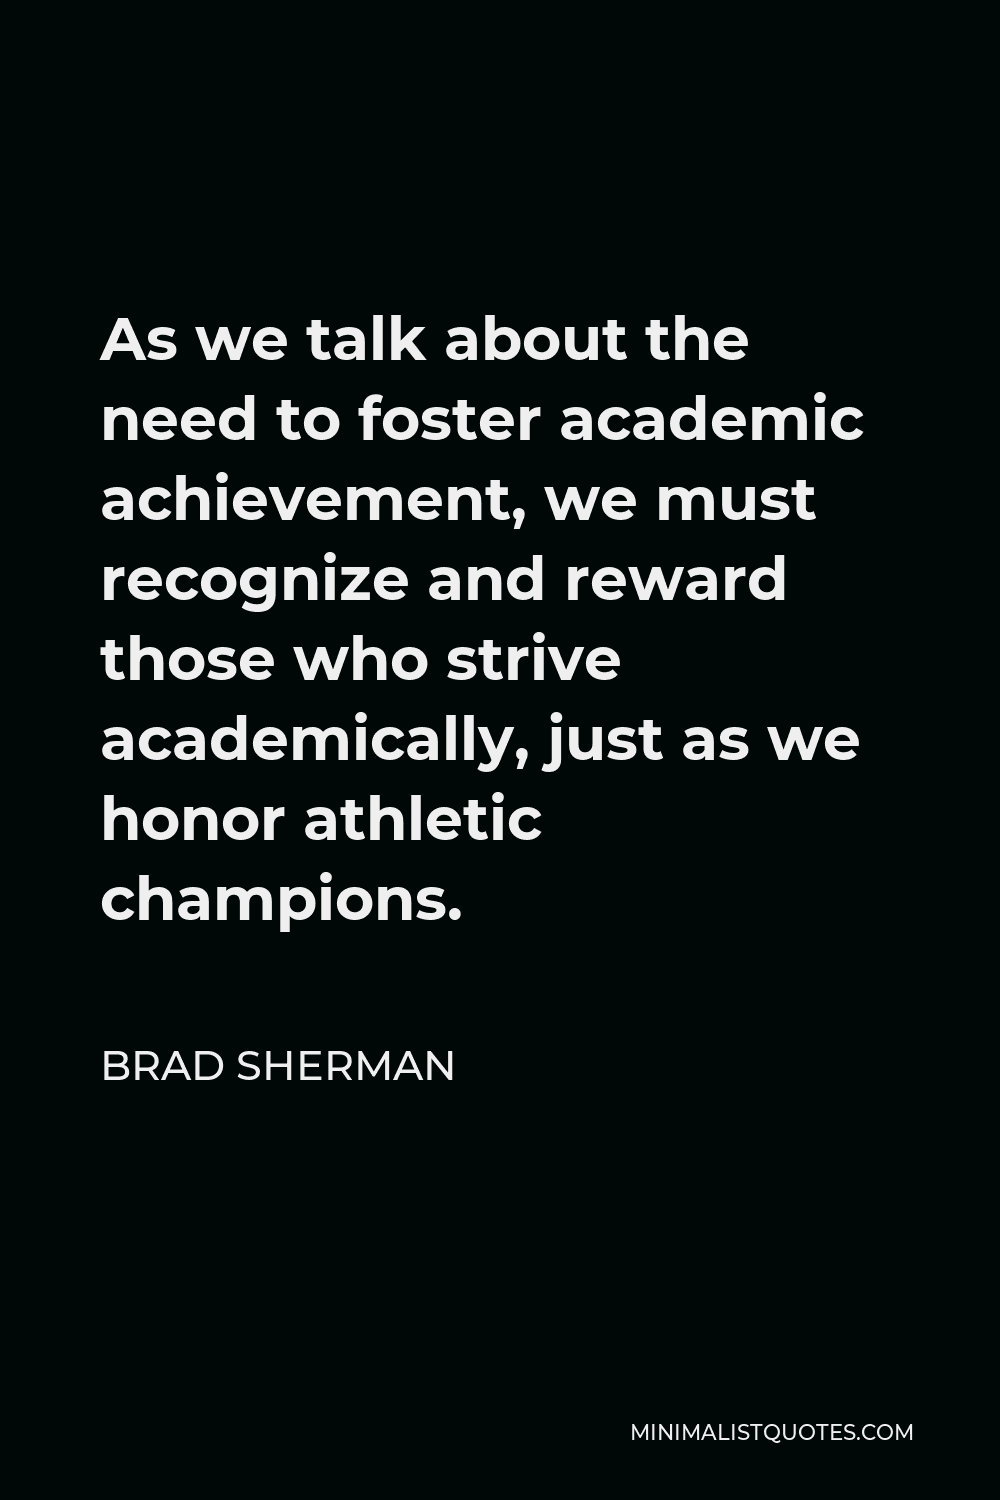 Brad Sherman Quote - As we talk about the need to foster academic achievement, we must recognize and reward those who strive academically, just as we honor athletic champions.